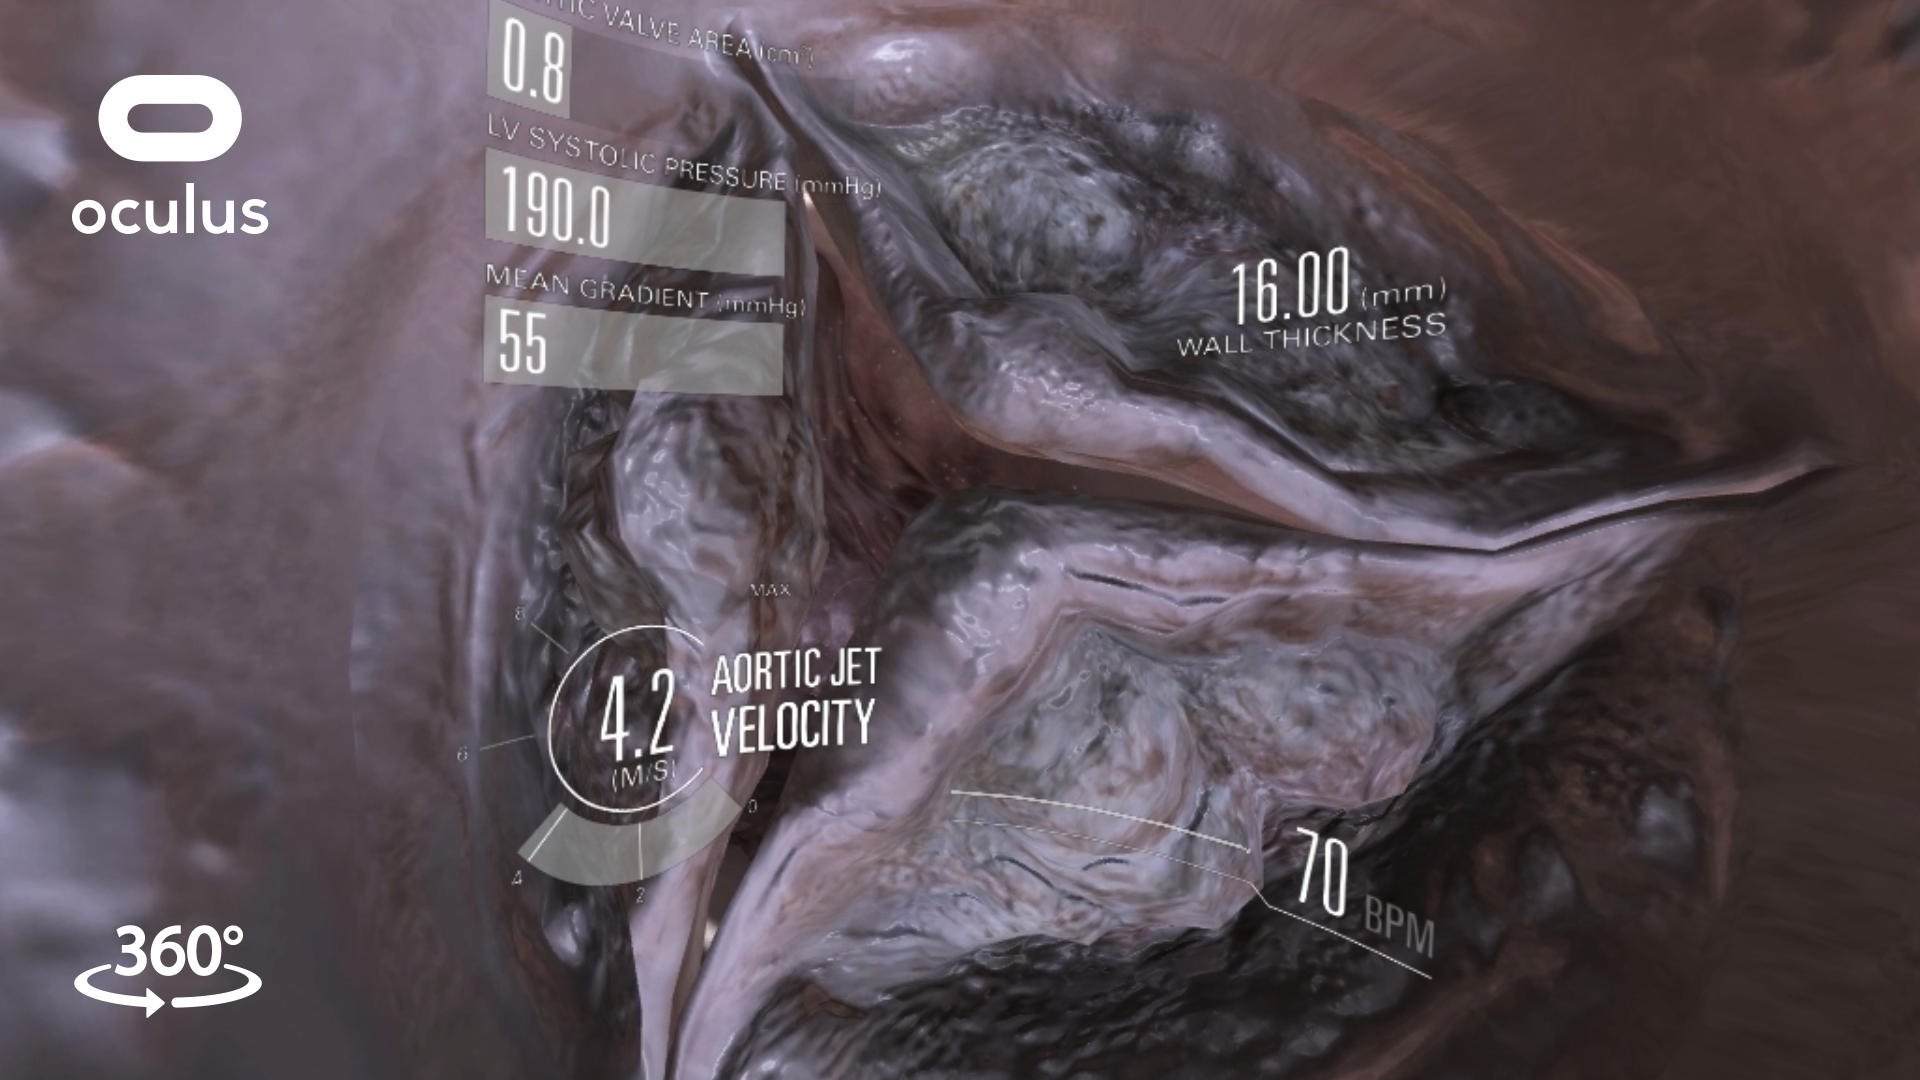 Heart valve in VR with graphic overlays displaying LV systolic pressure, aortic jet velocity and wall thickness, with the Oculus logo in the top left corner